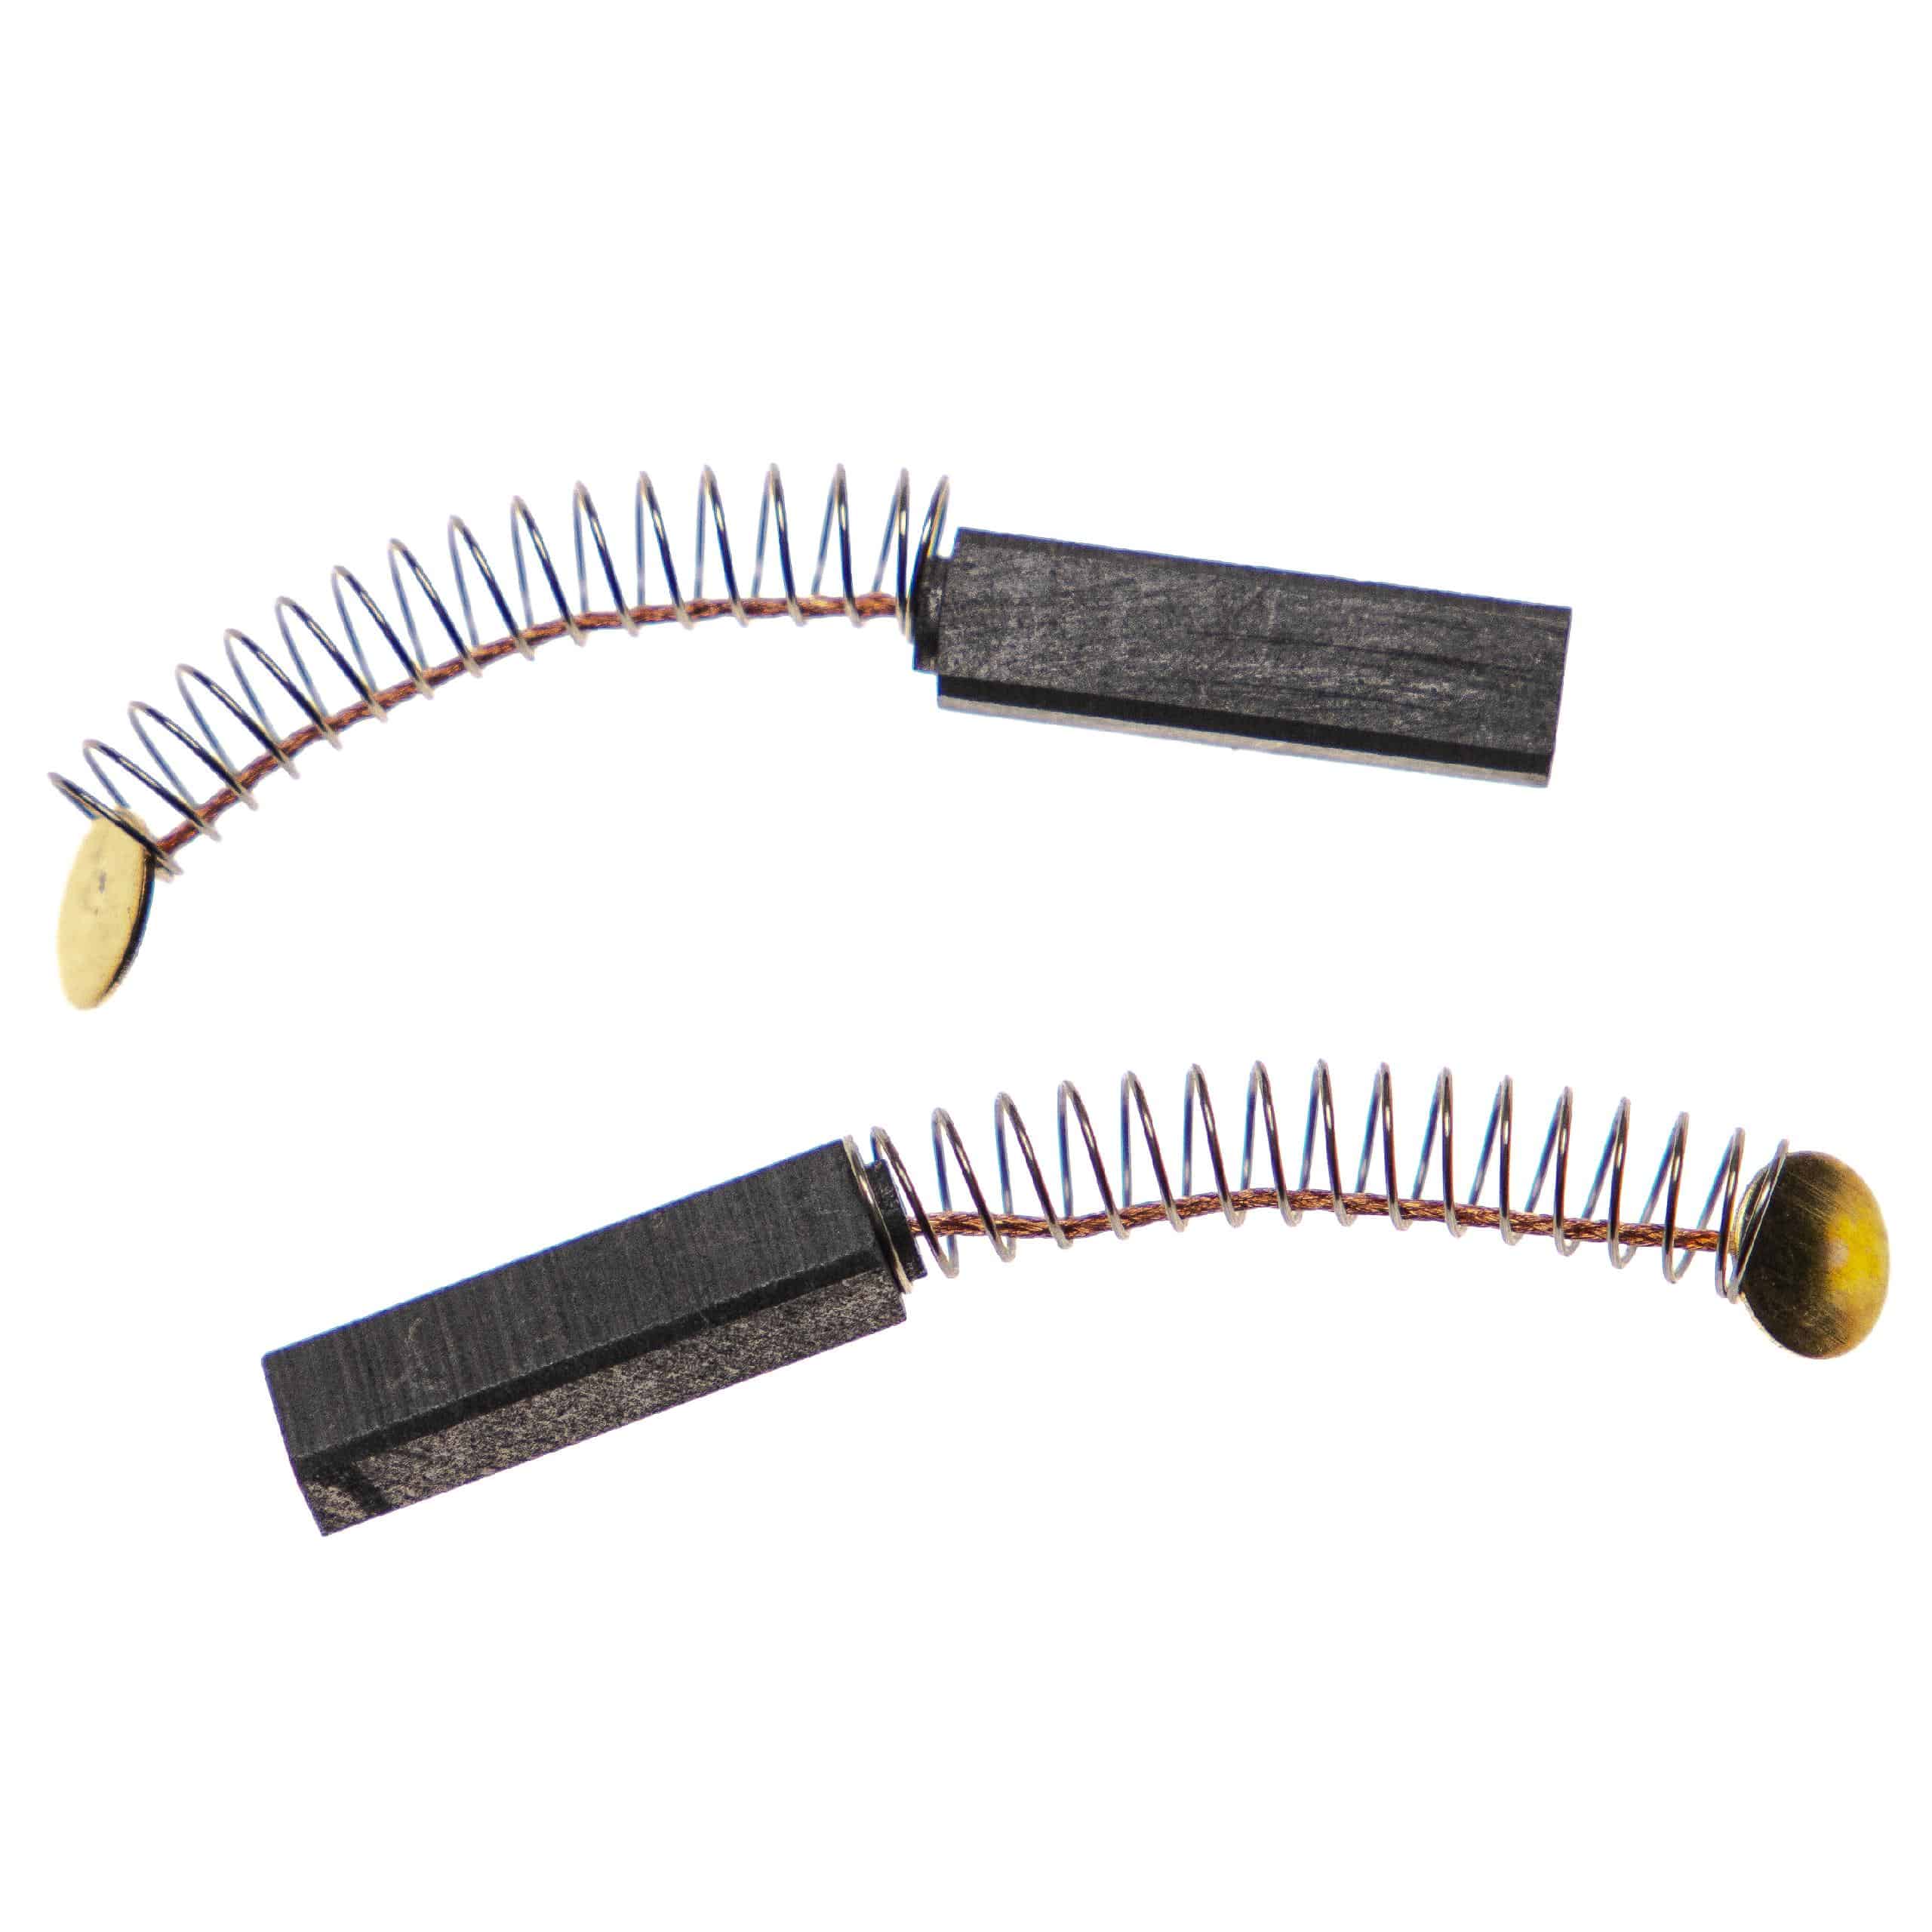 2x Carbon Brush suitable for Kenwood MixerA700 Electric Power Tools + Spring, 19.5 x 5.5 x 4mm